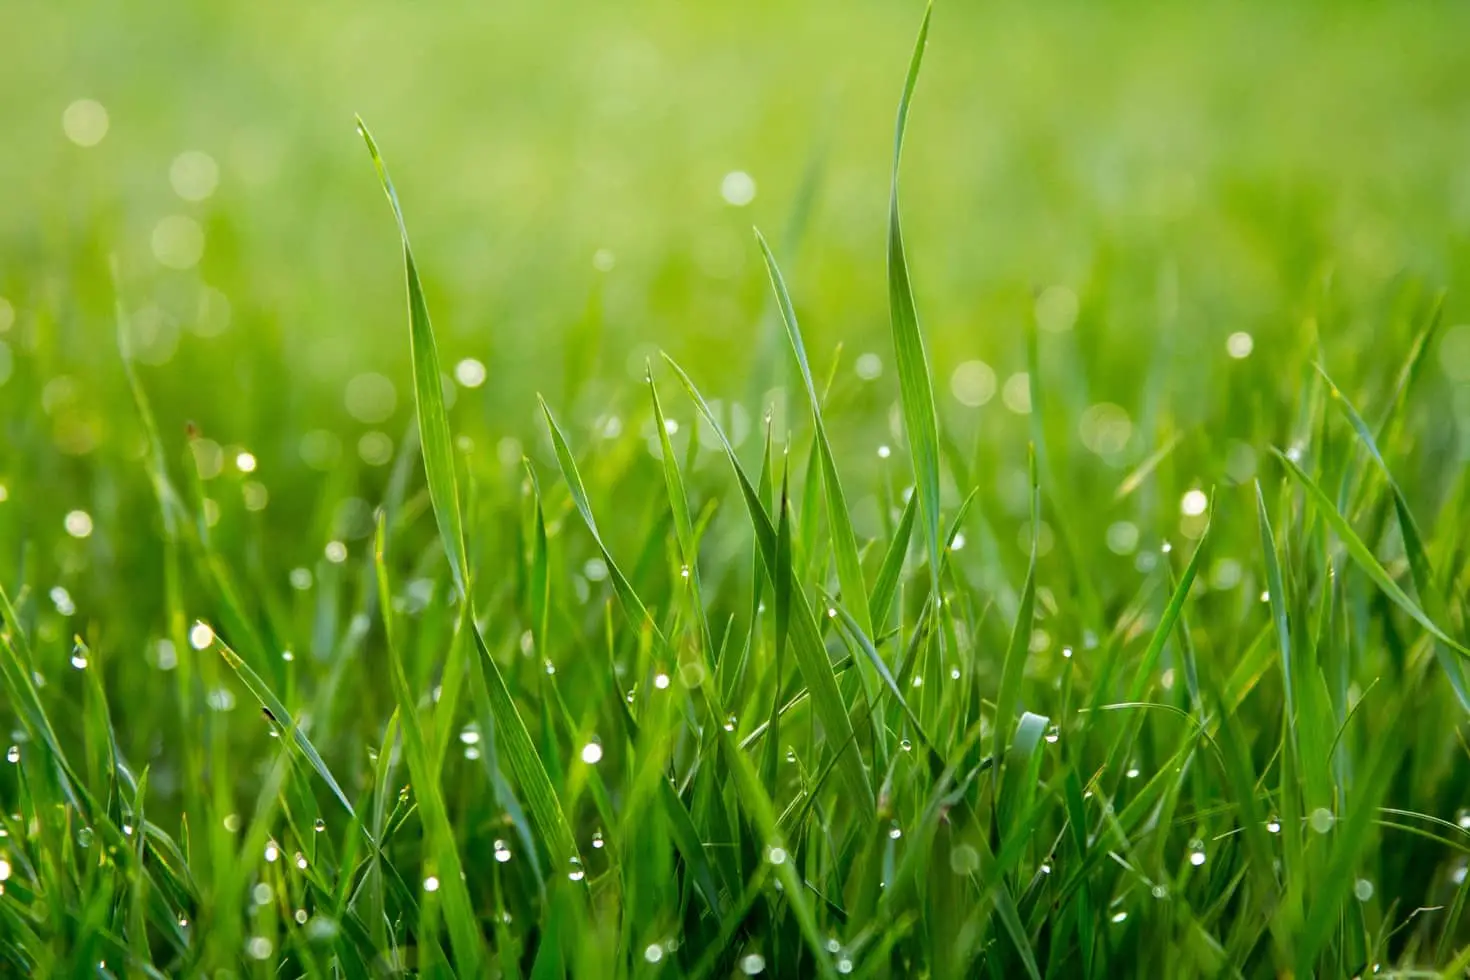 Green grass with dew on blades